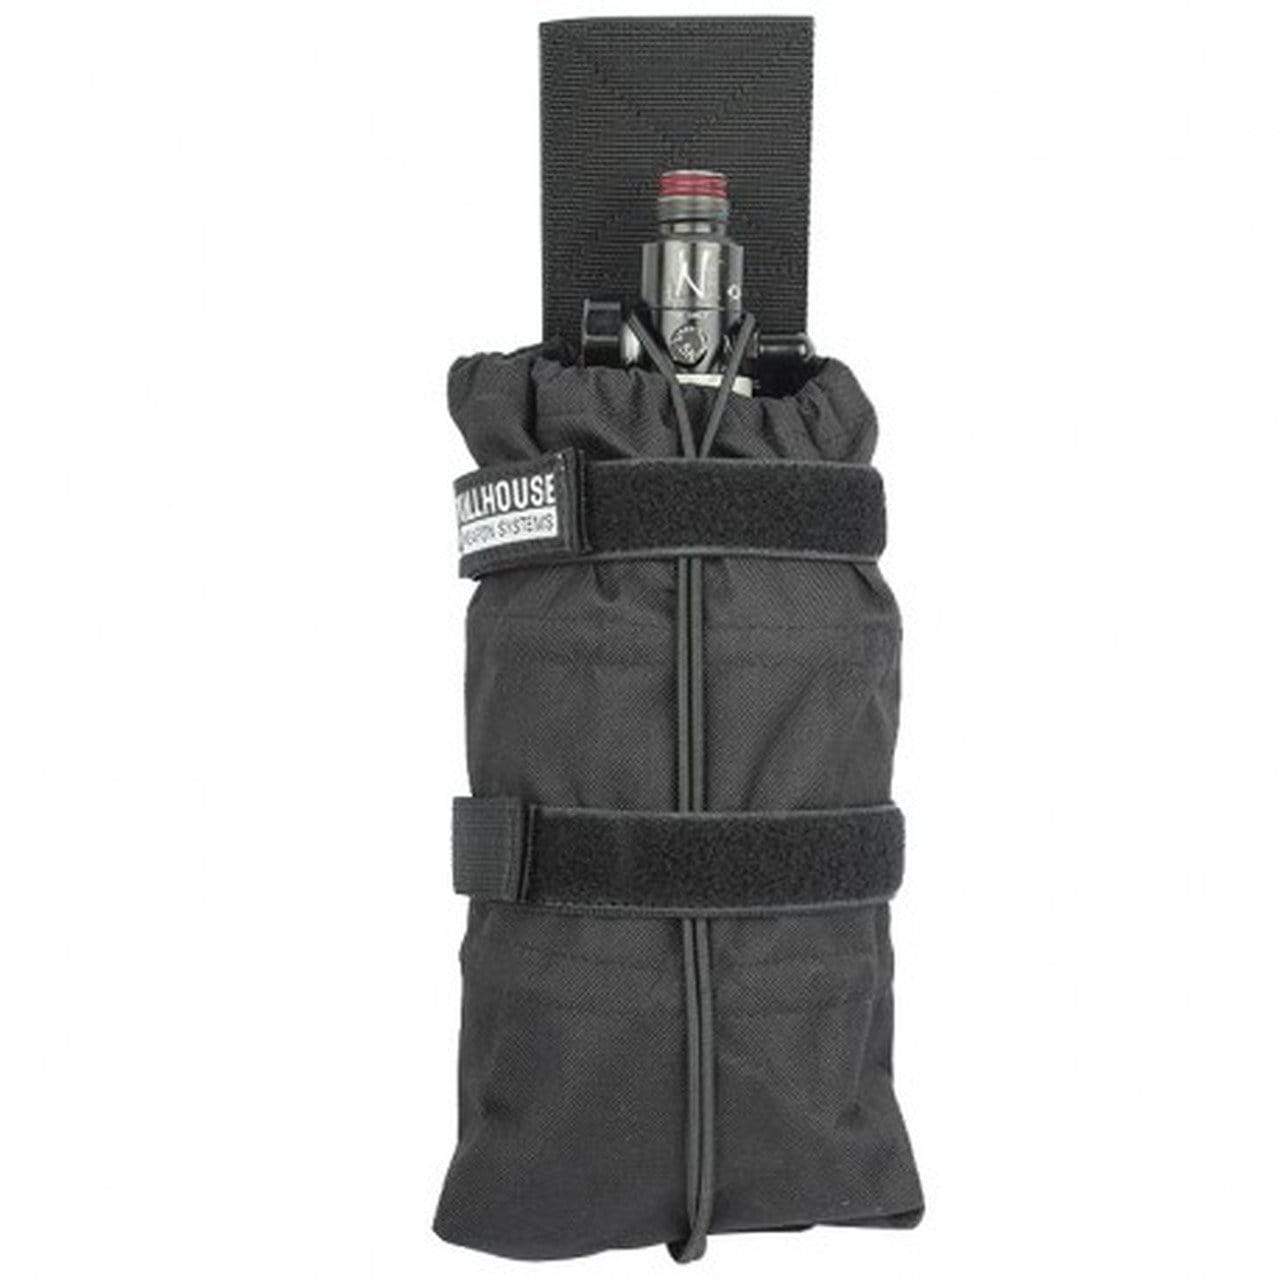 Killhouse Tank Pouch  - BLACK - Eminent Paintball And Airsoft